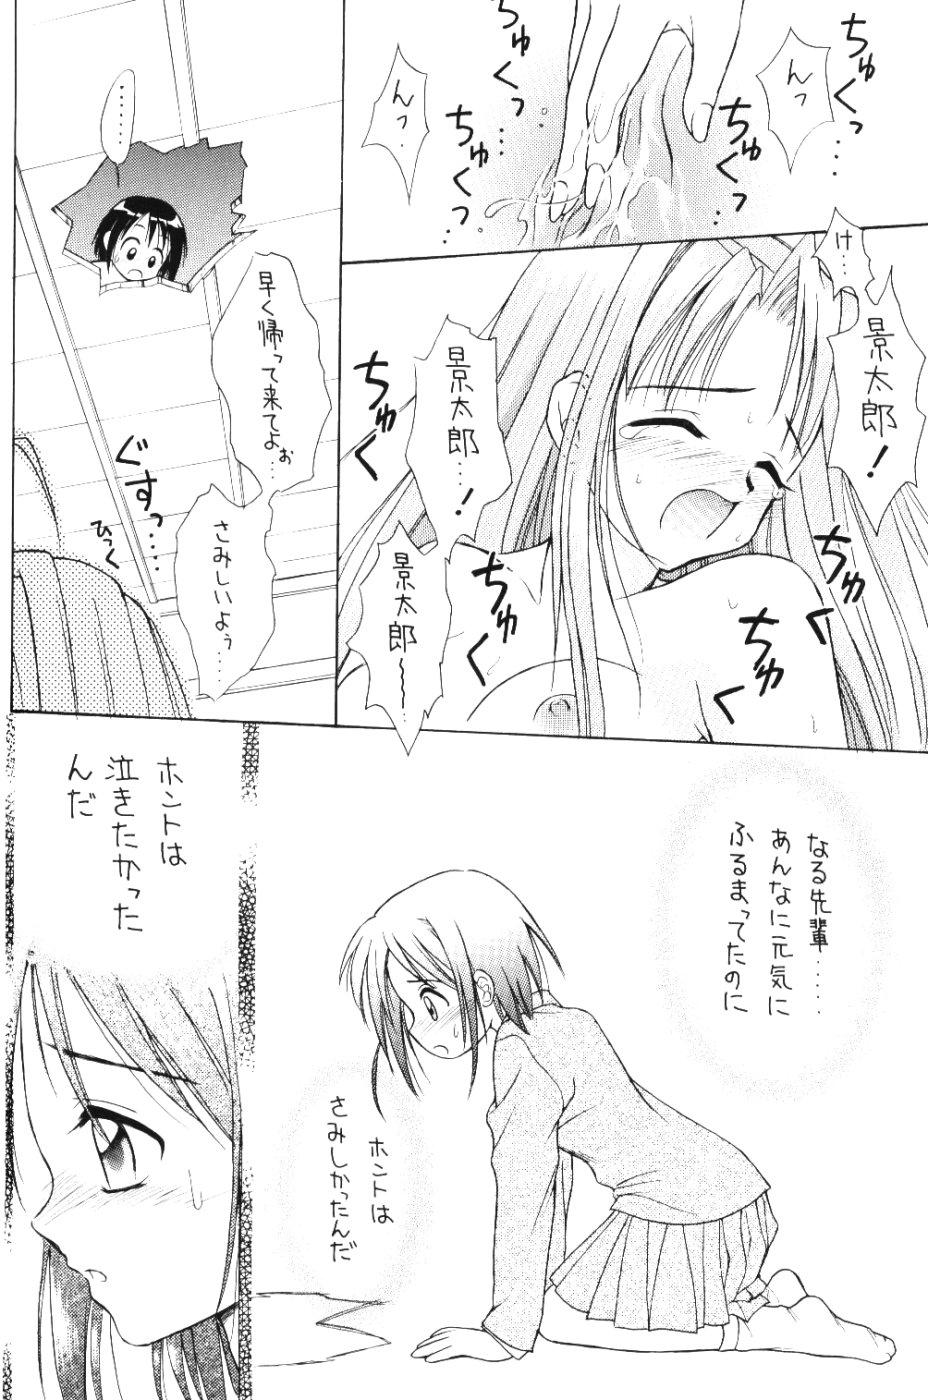 Sislovesme Lovely 4 - Love hina Russia - Page 11